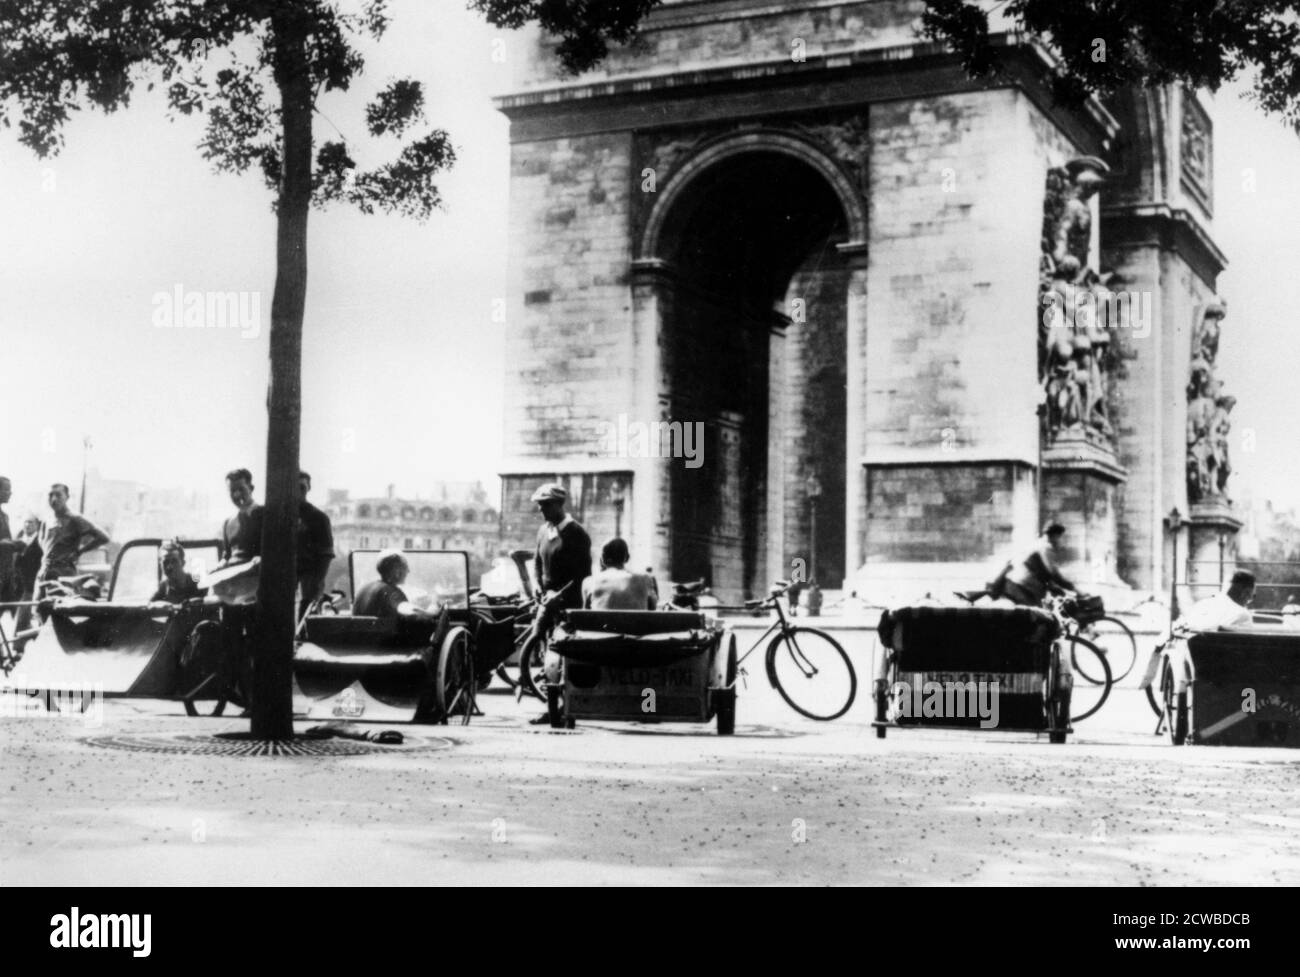 Bicycle taxis in the Place d'Etoile by the Arc de Triomphe, German-occupied Paris, August 1943. Petrol was in short supply during the occupation, with Germans using most of it. So the bicycle taxi, or taxi-velo, was a common sight on the streets of Paris. The photographer is unknown. Stock Photo